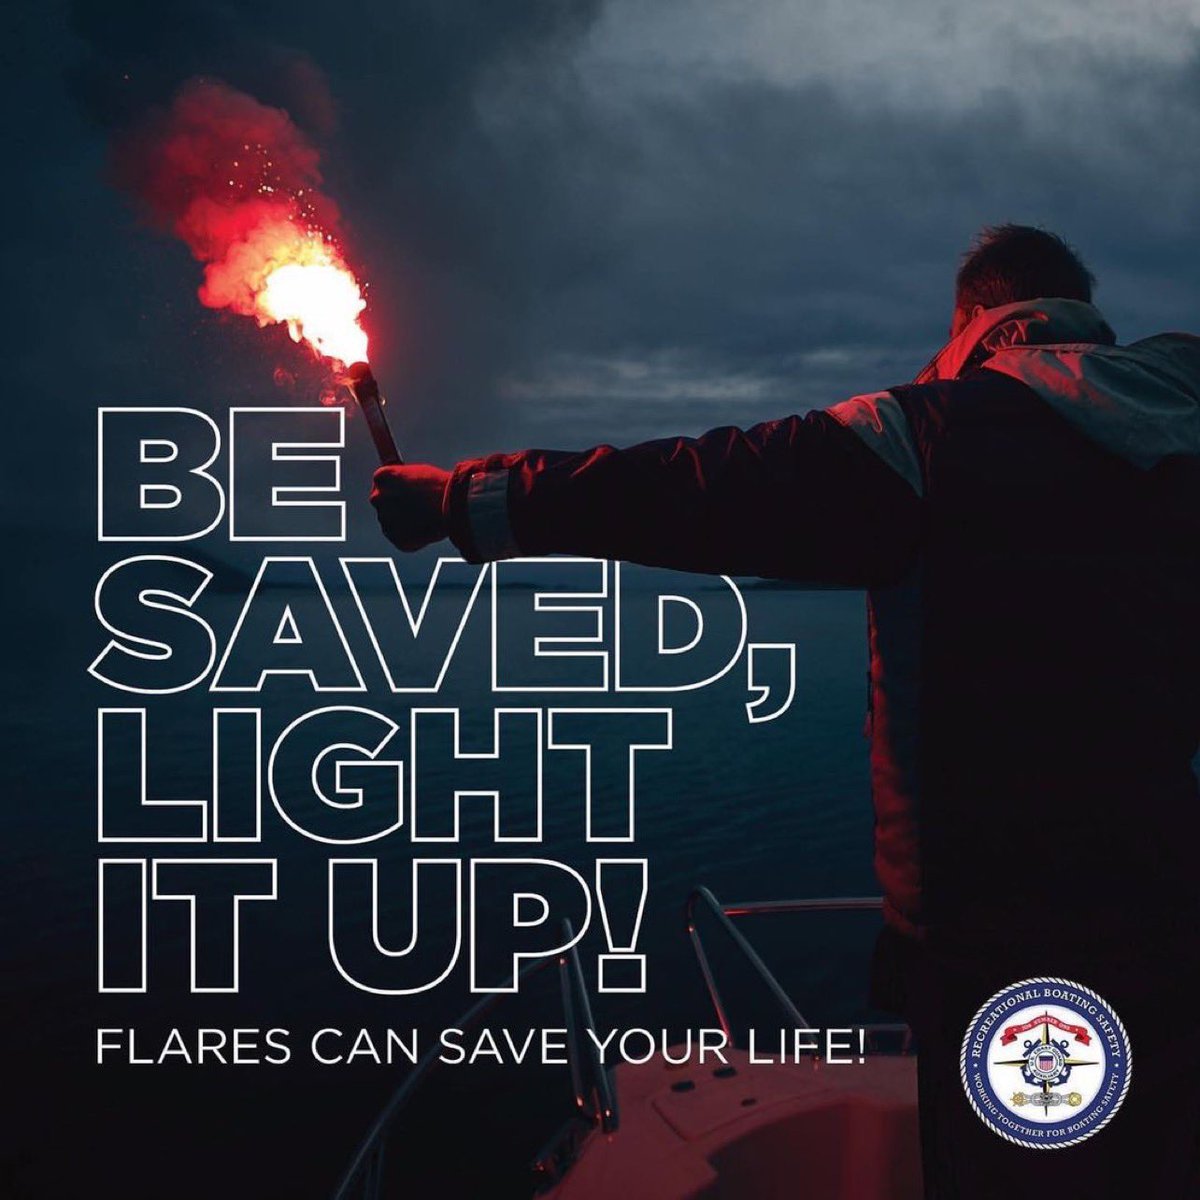 Flares are important and required safety equipment on your boat. Don’t leave without them!!

 #uscgaux #safety #recreationalboatingsafety #safeboating #uscg #USCG #boatinglife #SaturdayMorning #SaturdayFunDay #SaturdayStyle #SaturdayLunch

Graphic by B-Directorate staff.